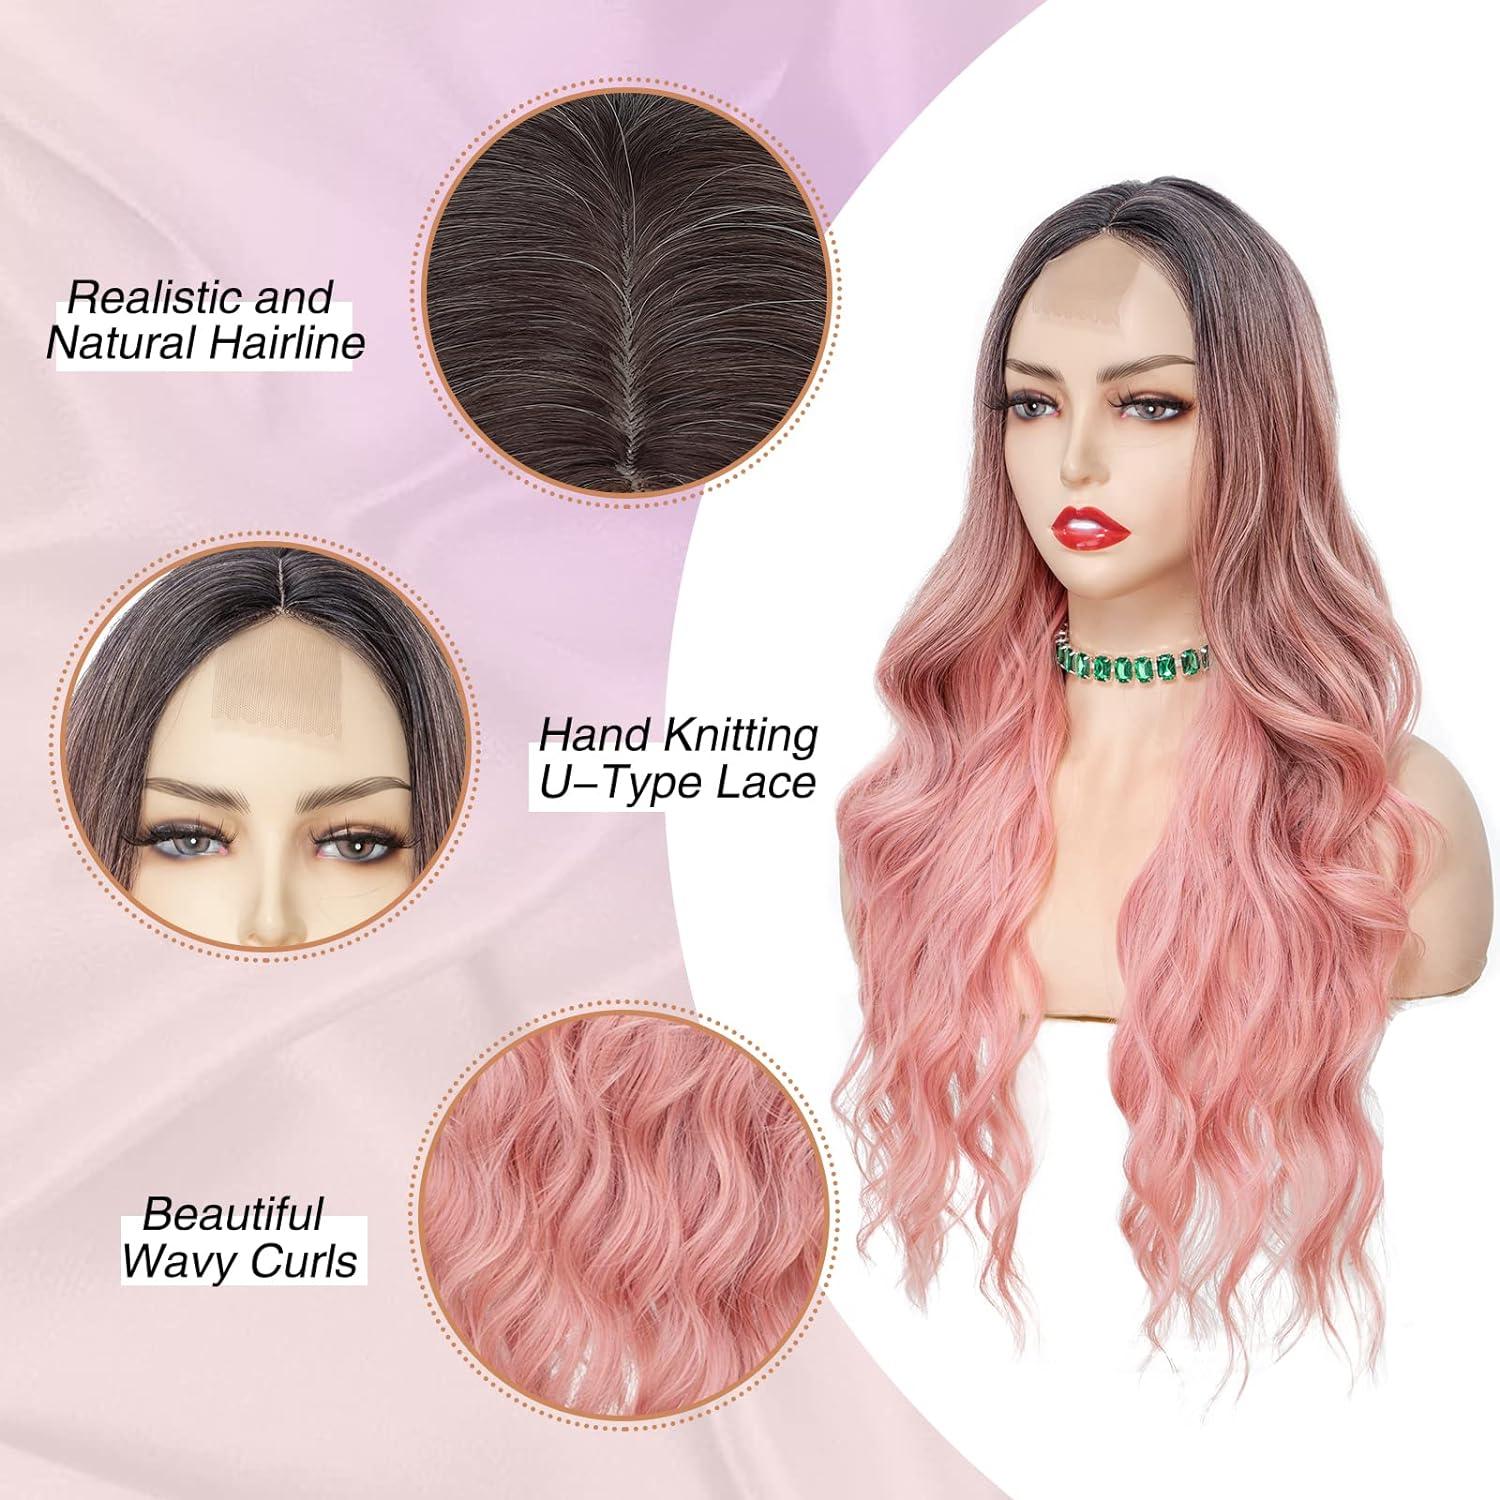 Toyotress Long Wavy Pale Pink Wig For Women Wig Curly Synthetic Hair Natural Looking Heat Resistant Fiber For Daily Party Cosplay Wear